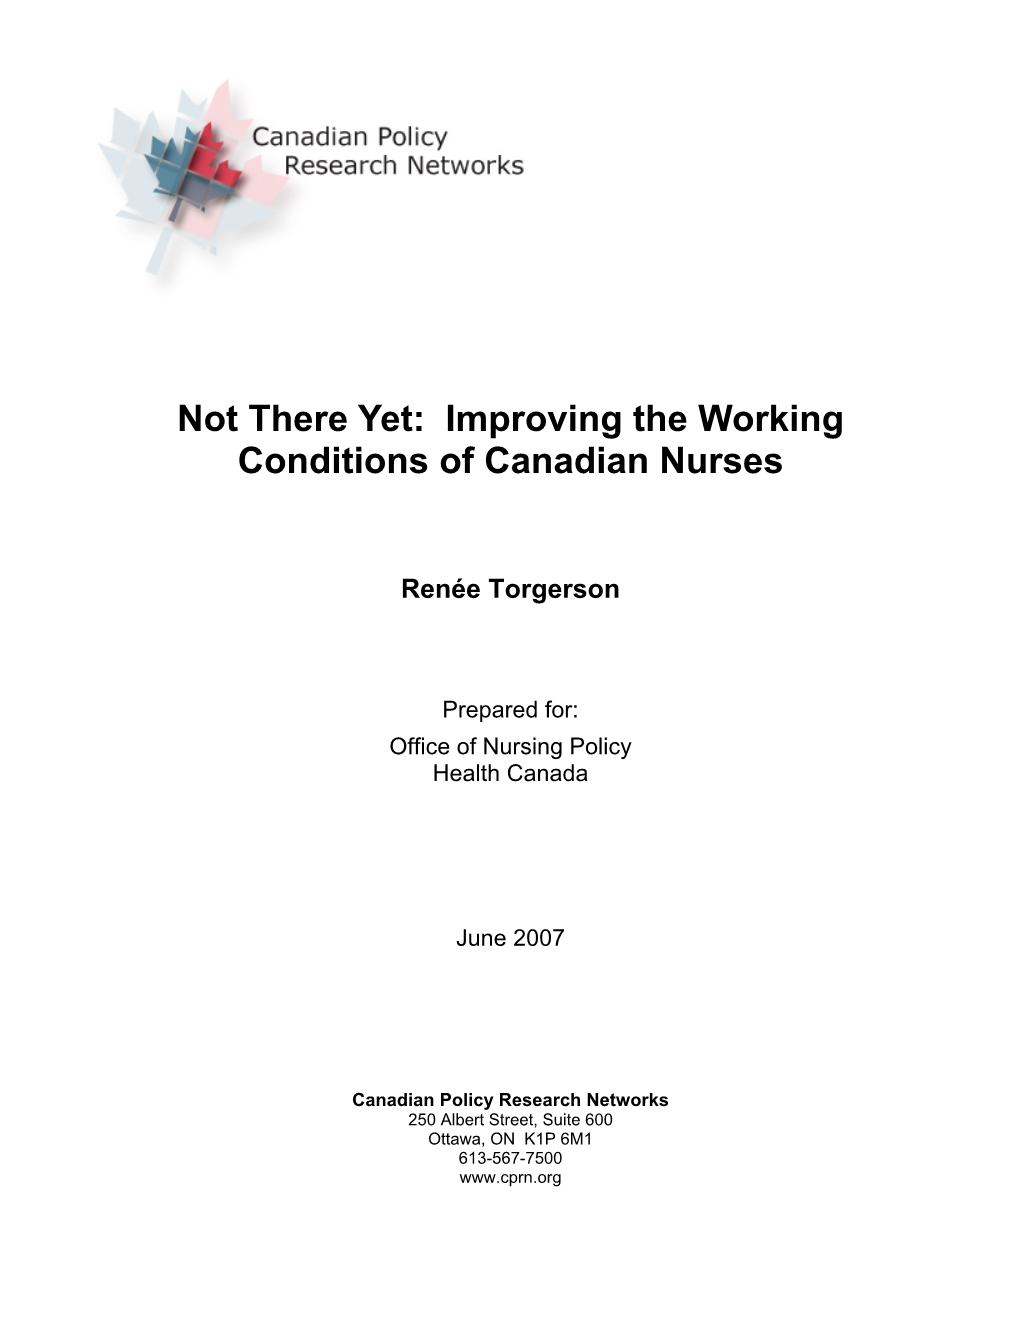 Not There Yet: Improving the Working Conditions of Canadian Nurses